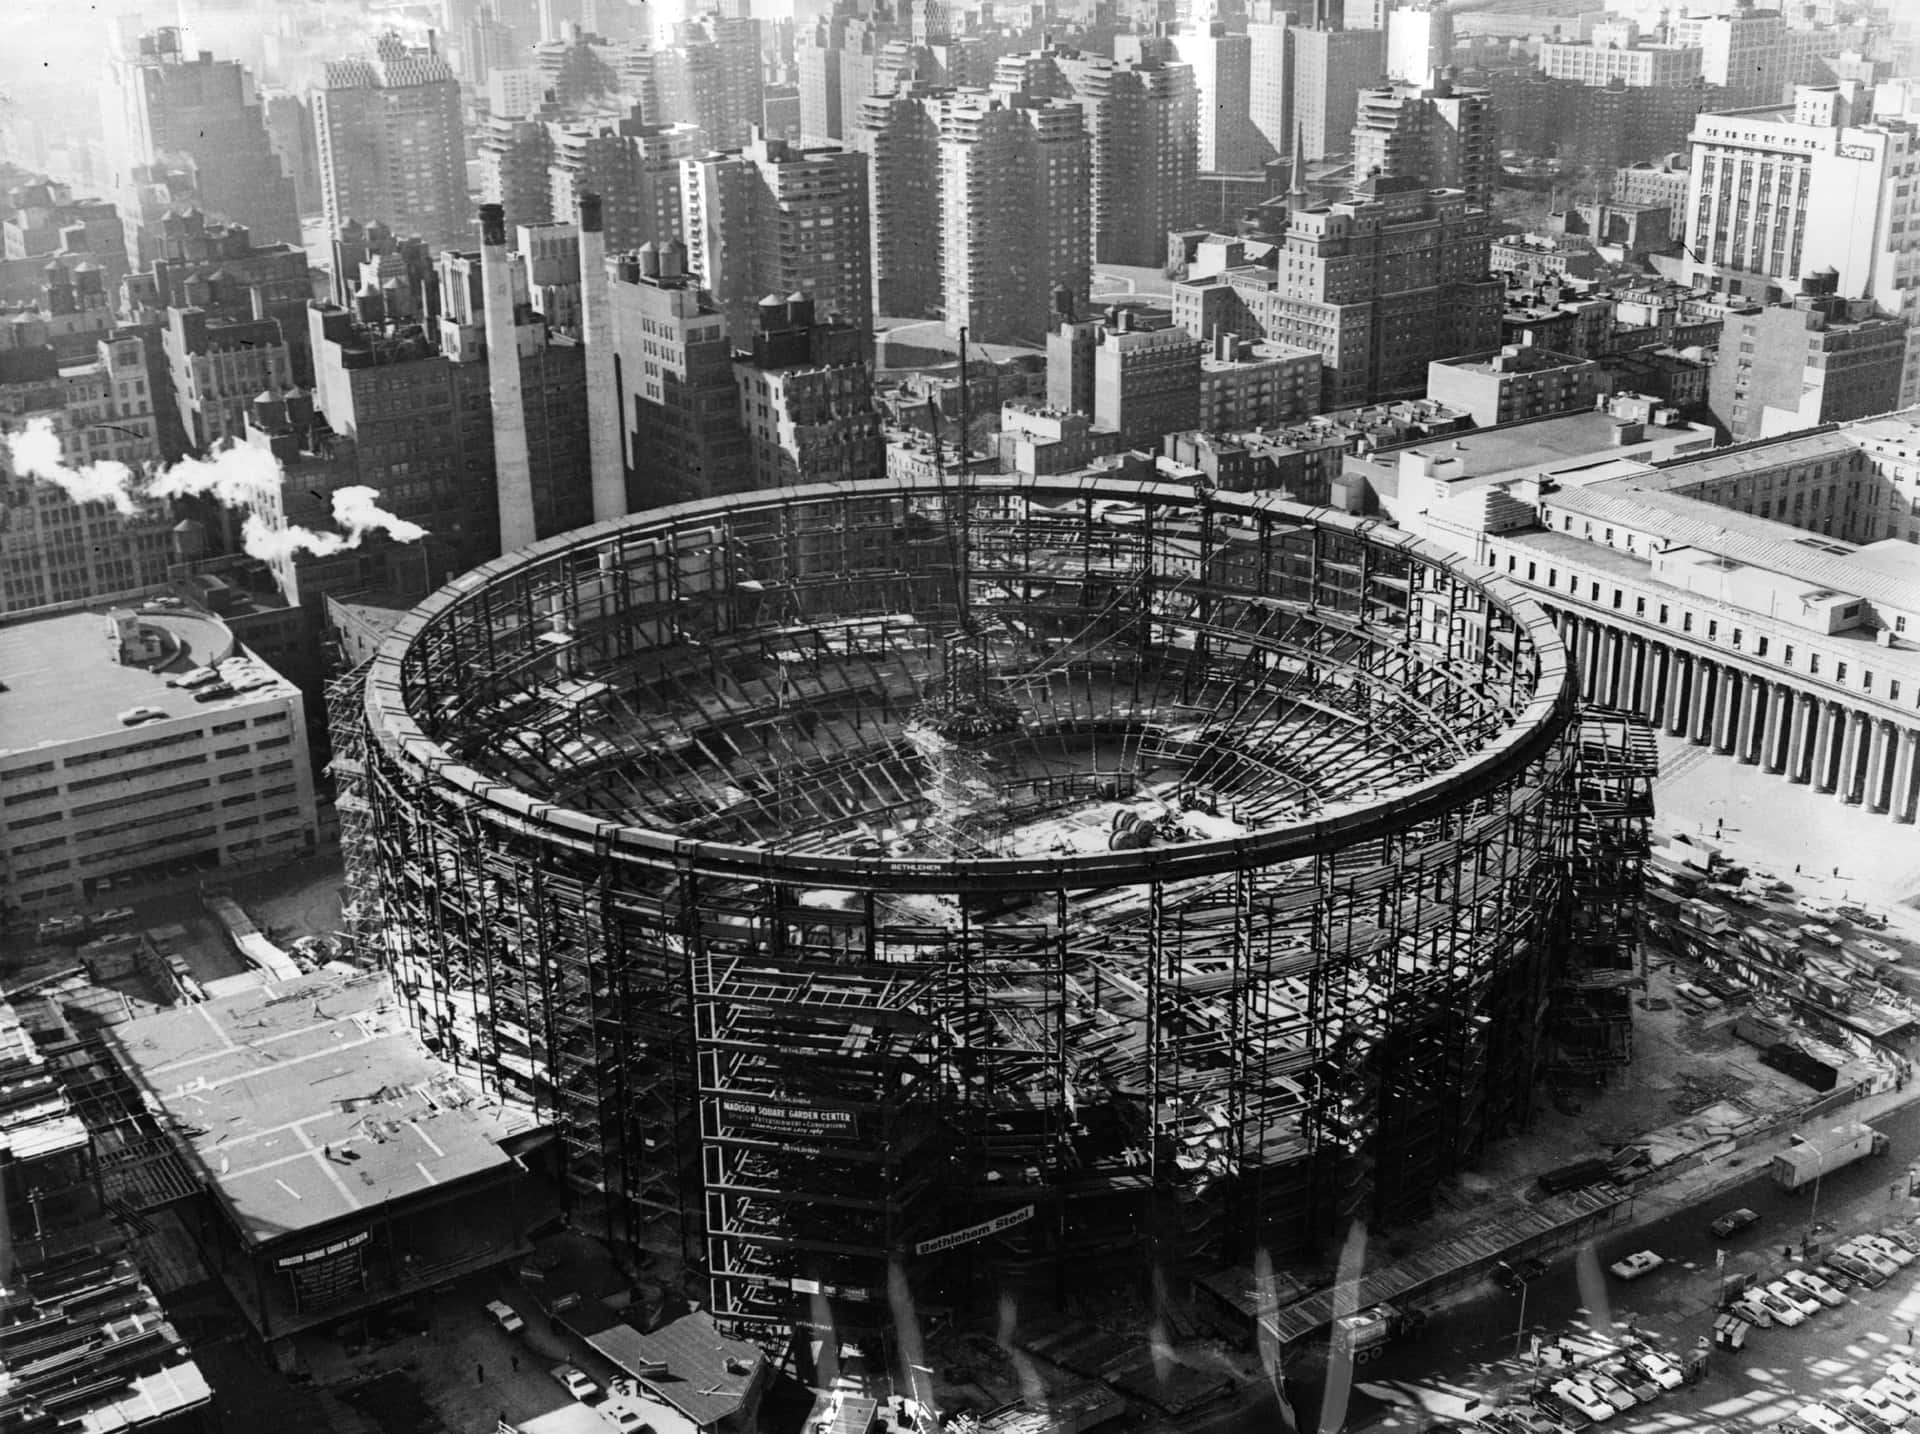 A Large Circular Building Under Construction In A City Wallpaper